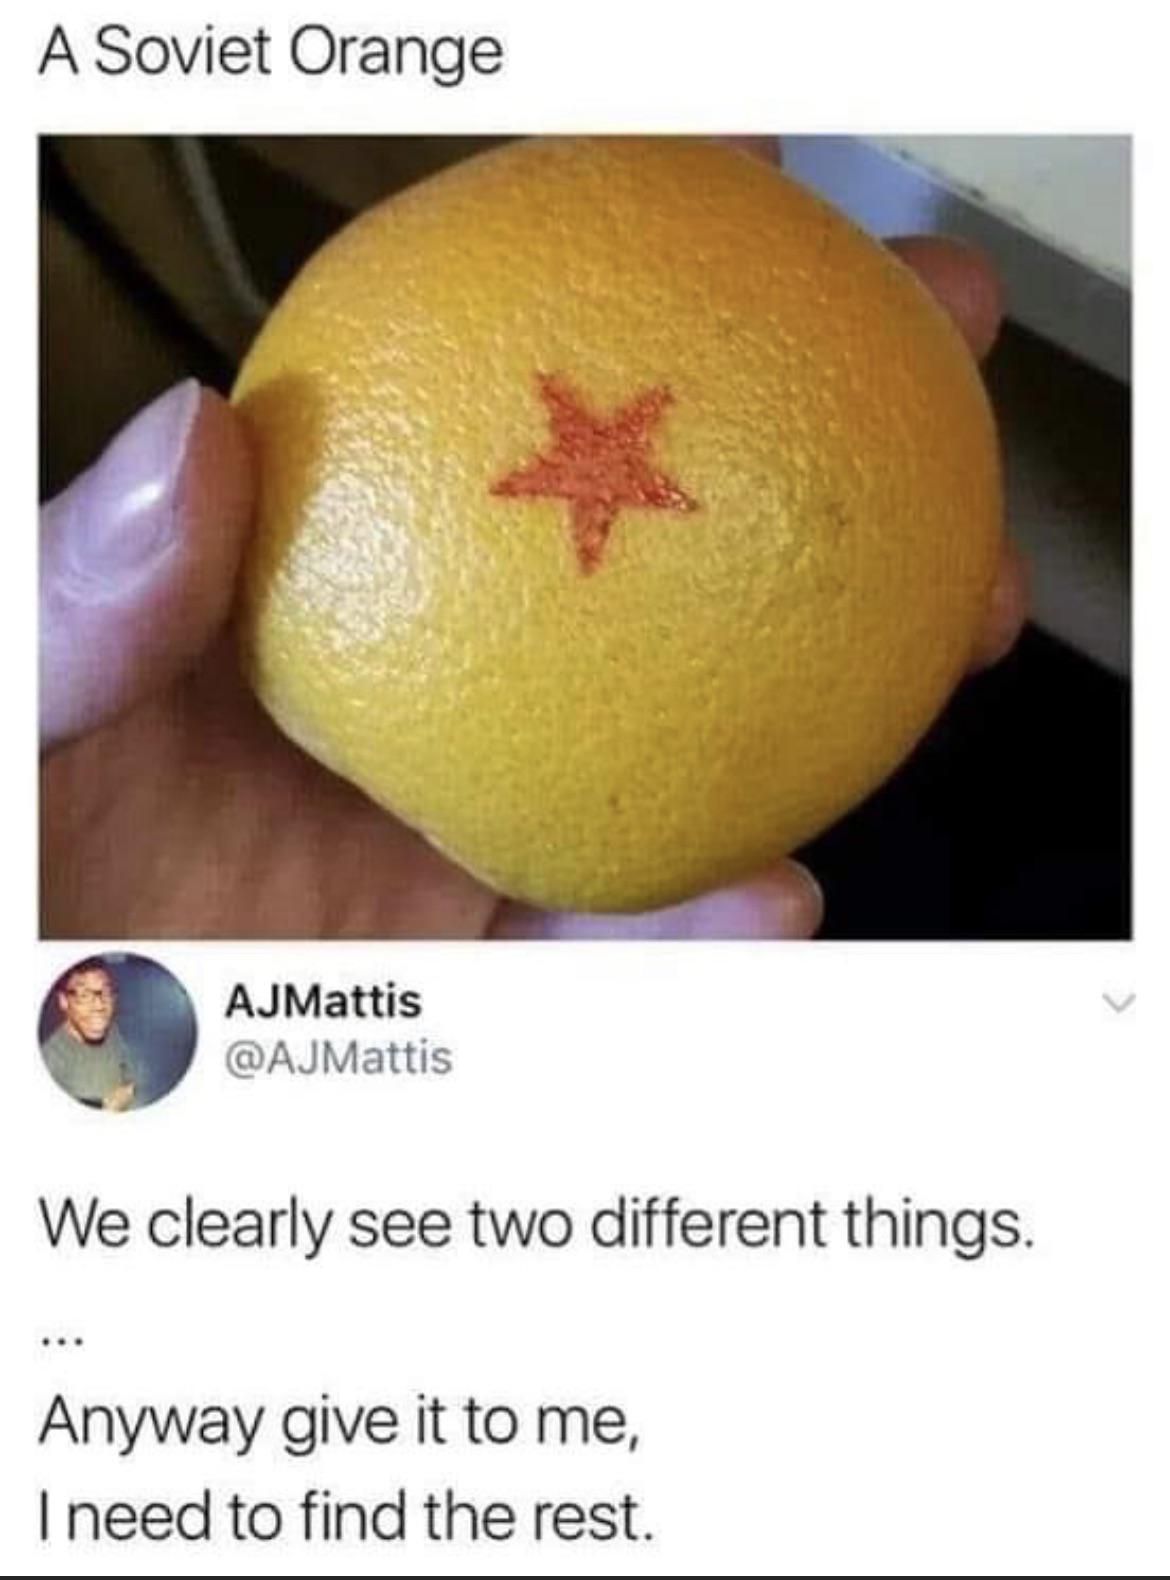 memes reddit twitter - soviet orange - A Soviet Orange AJMattis We clearly see two different things. Anyway give it to me, I need to find the rest.